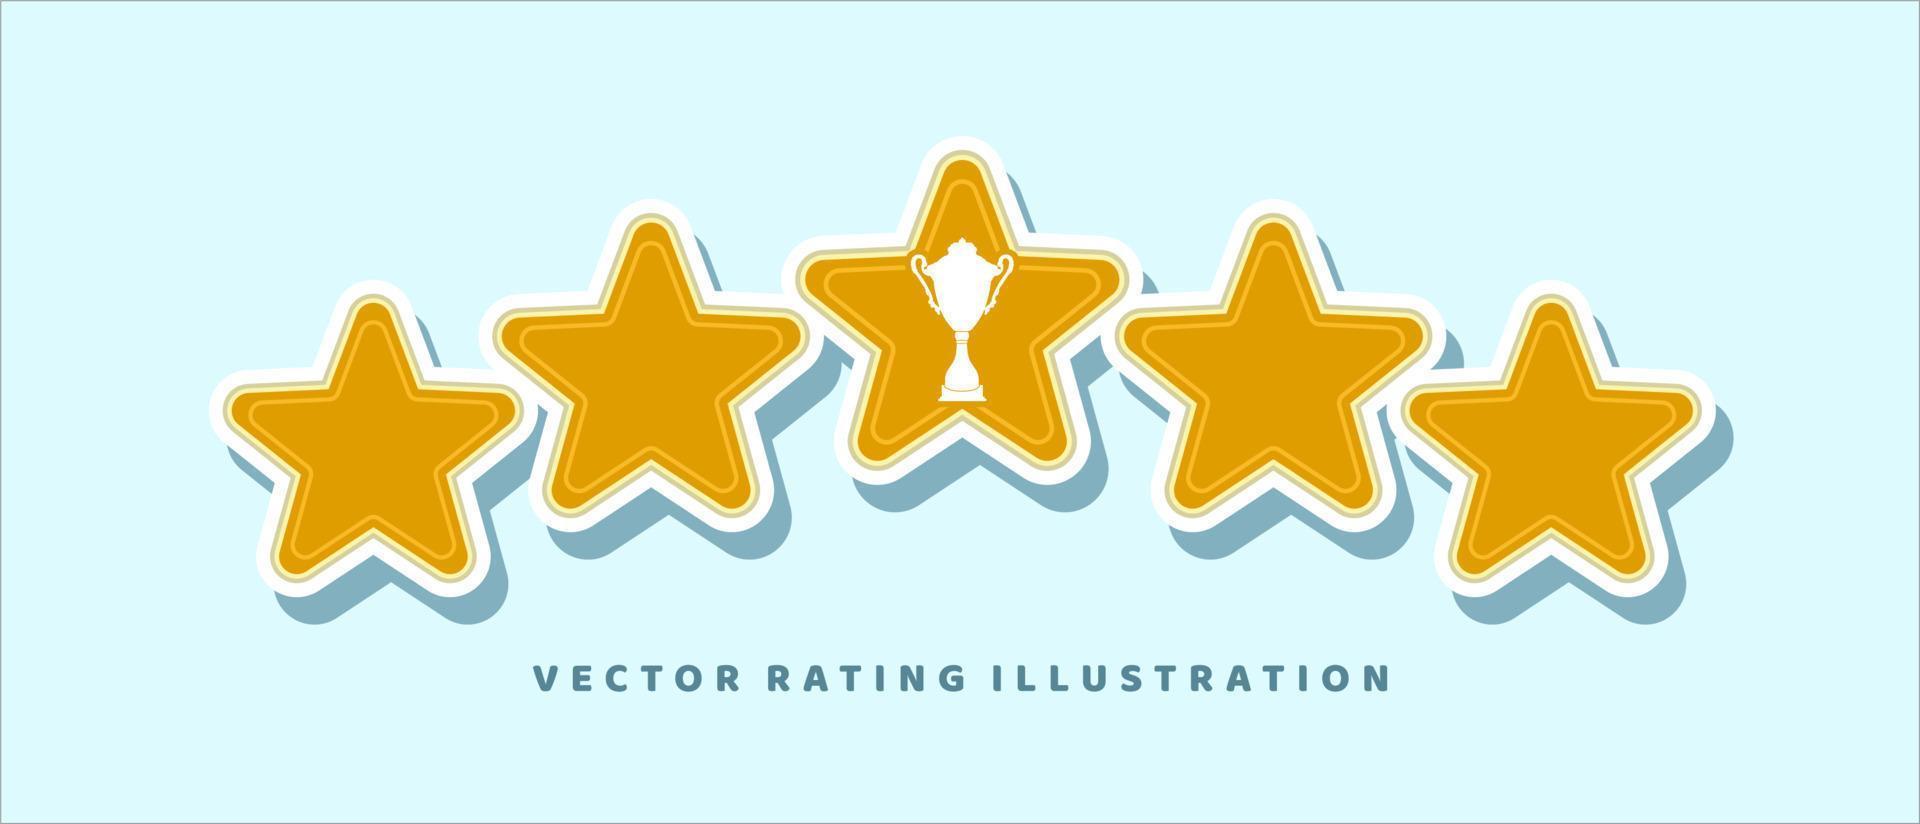 Five Star Rating With Trophy Icon vector design inspiration